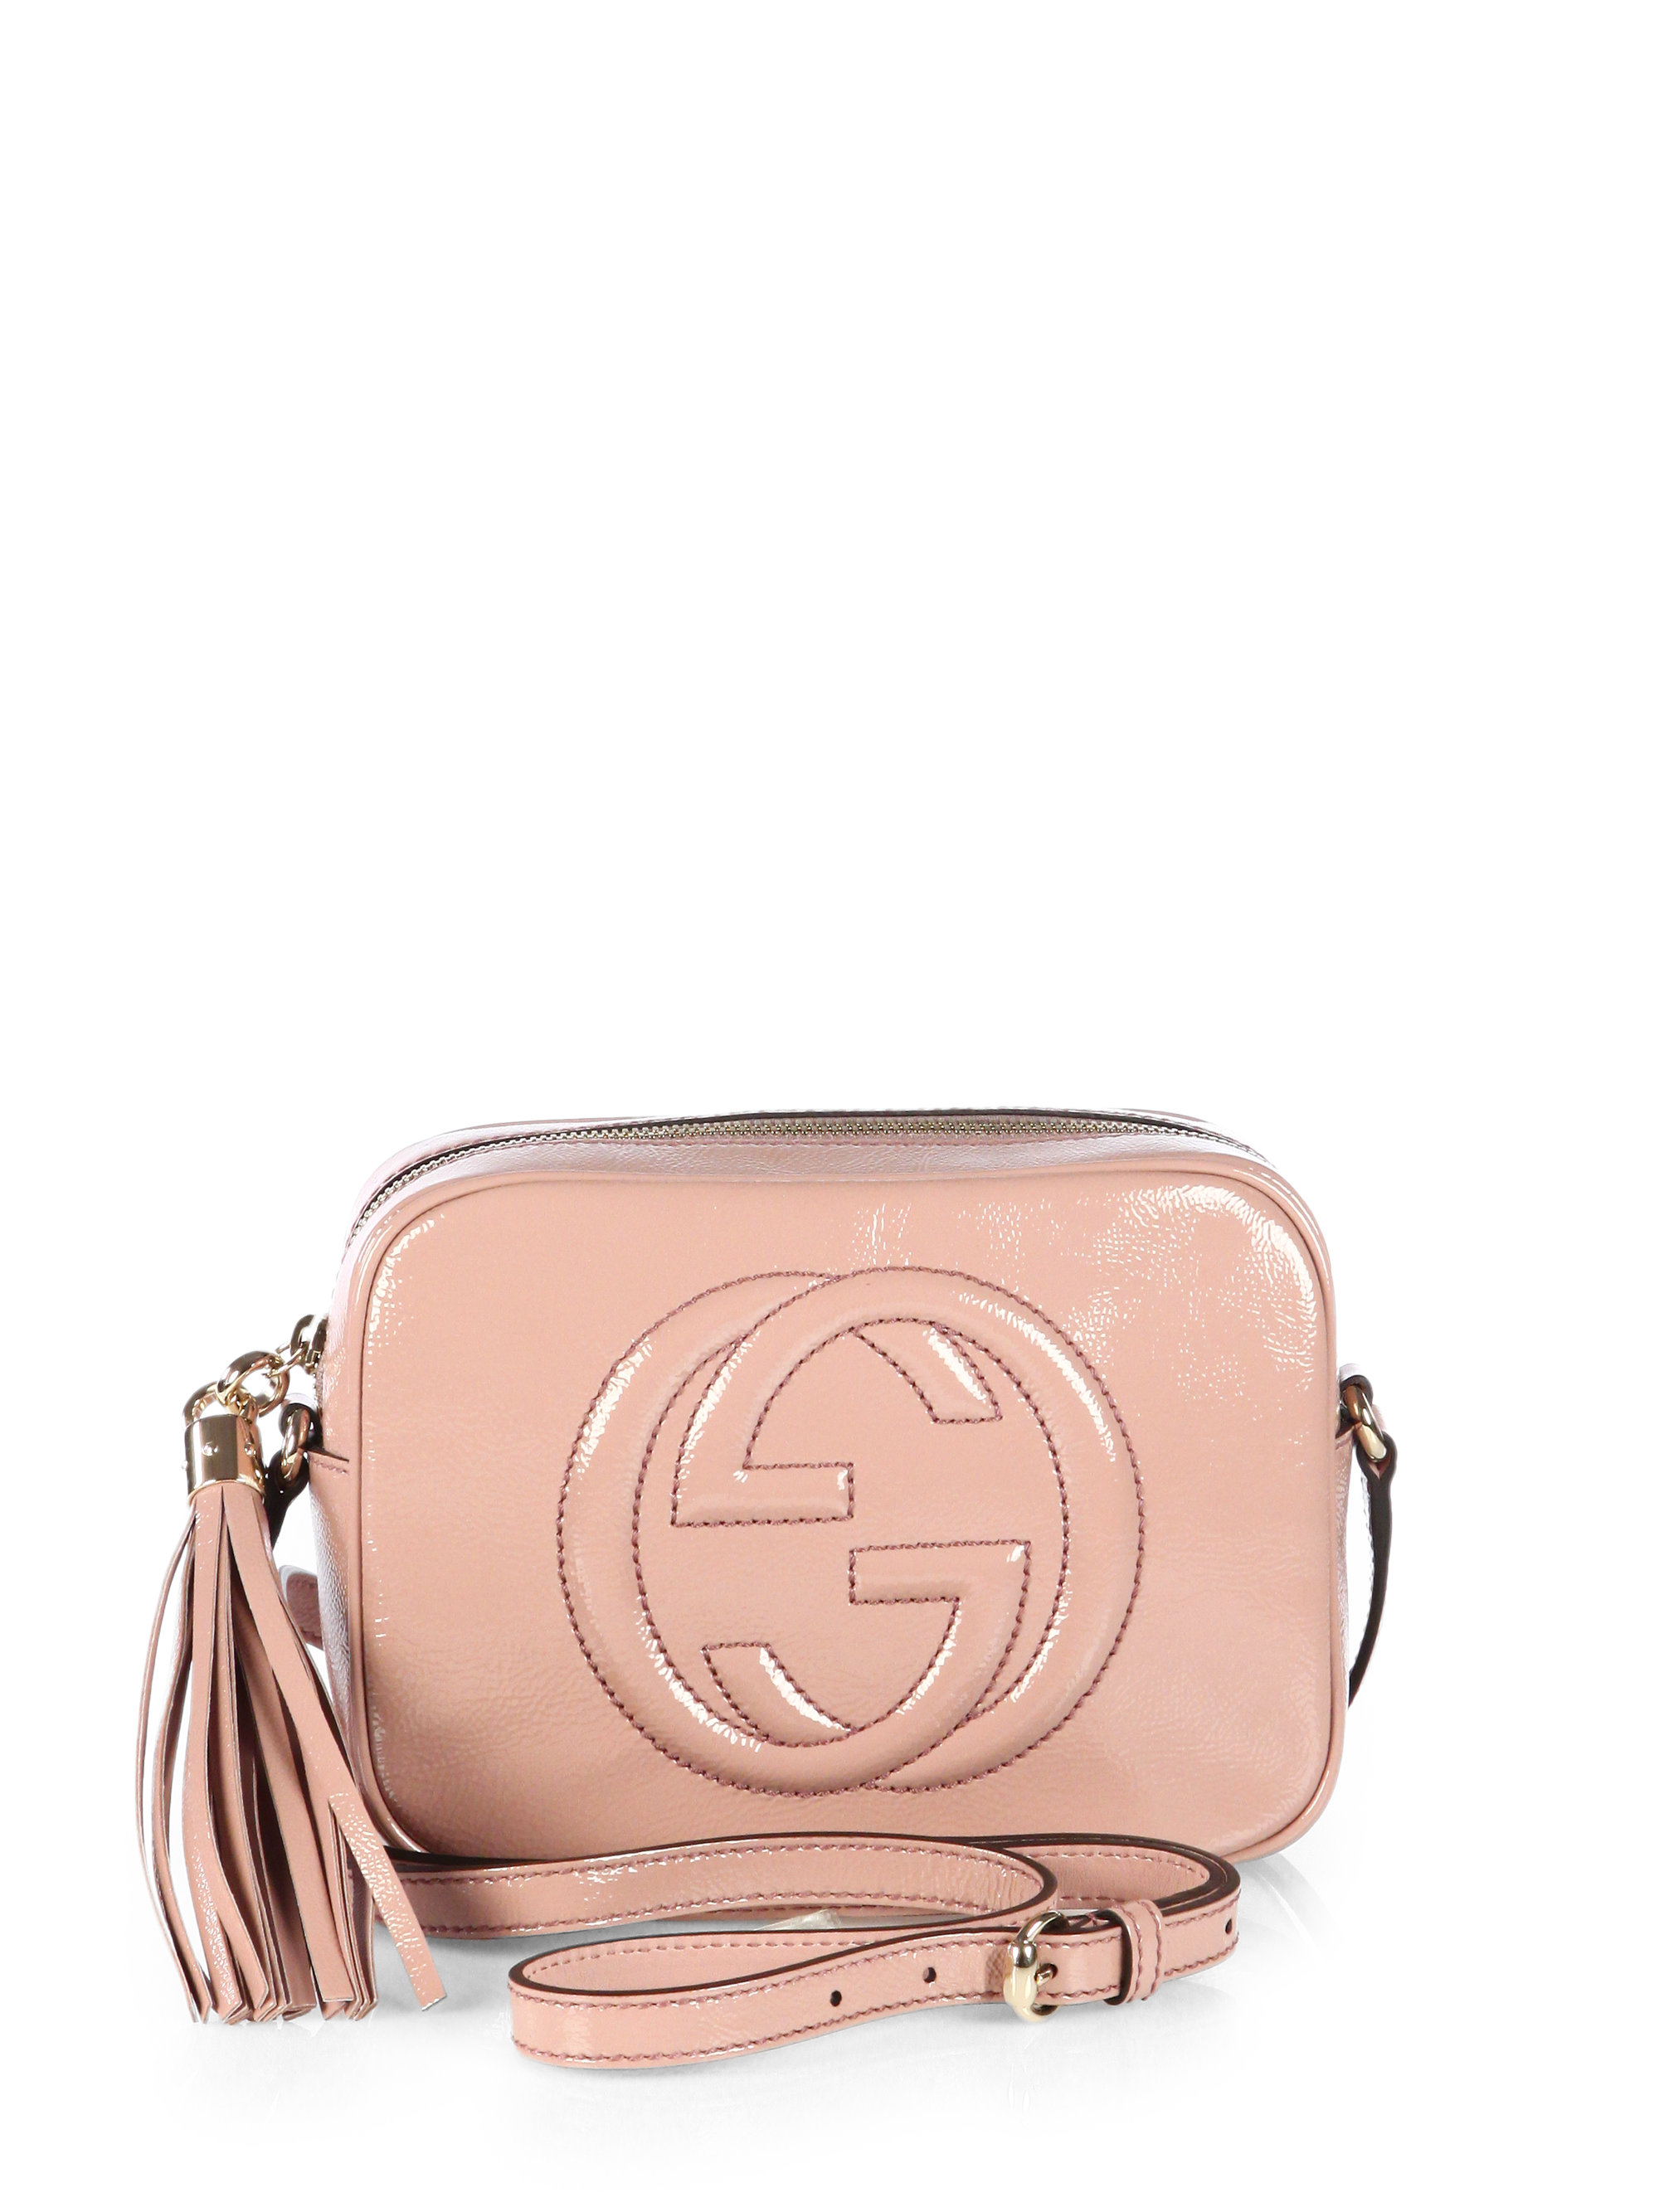 Gucci Soho Patent Leather Disco Bag in Blush (Pink) | Lyst